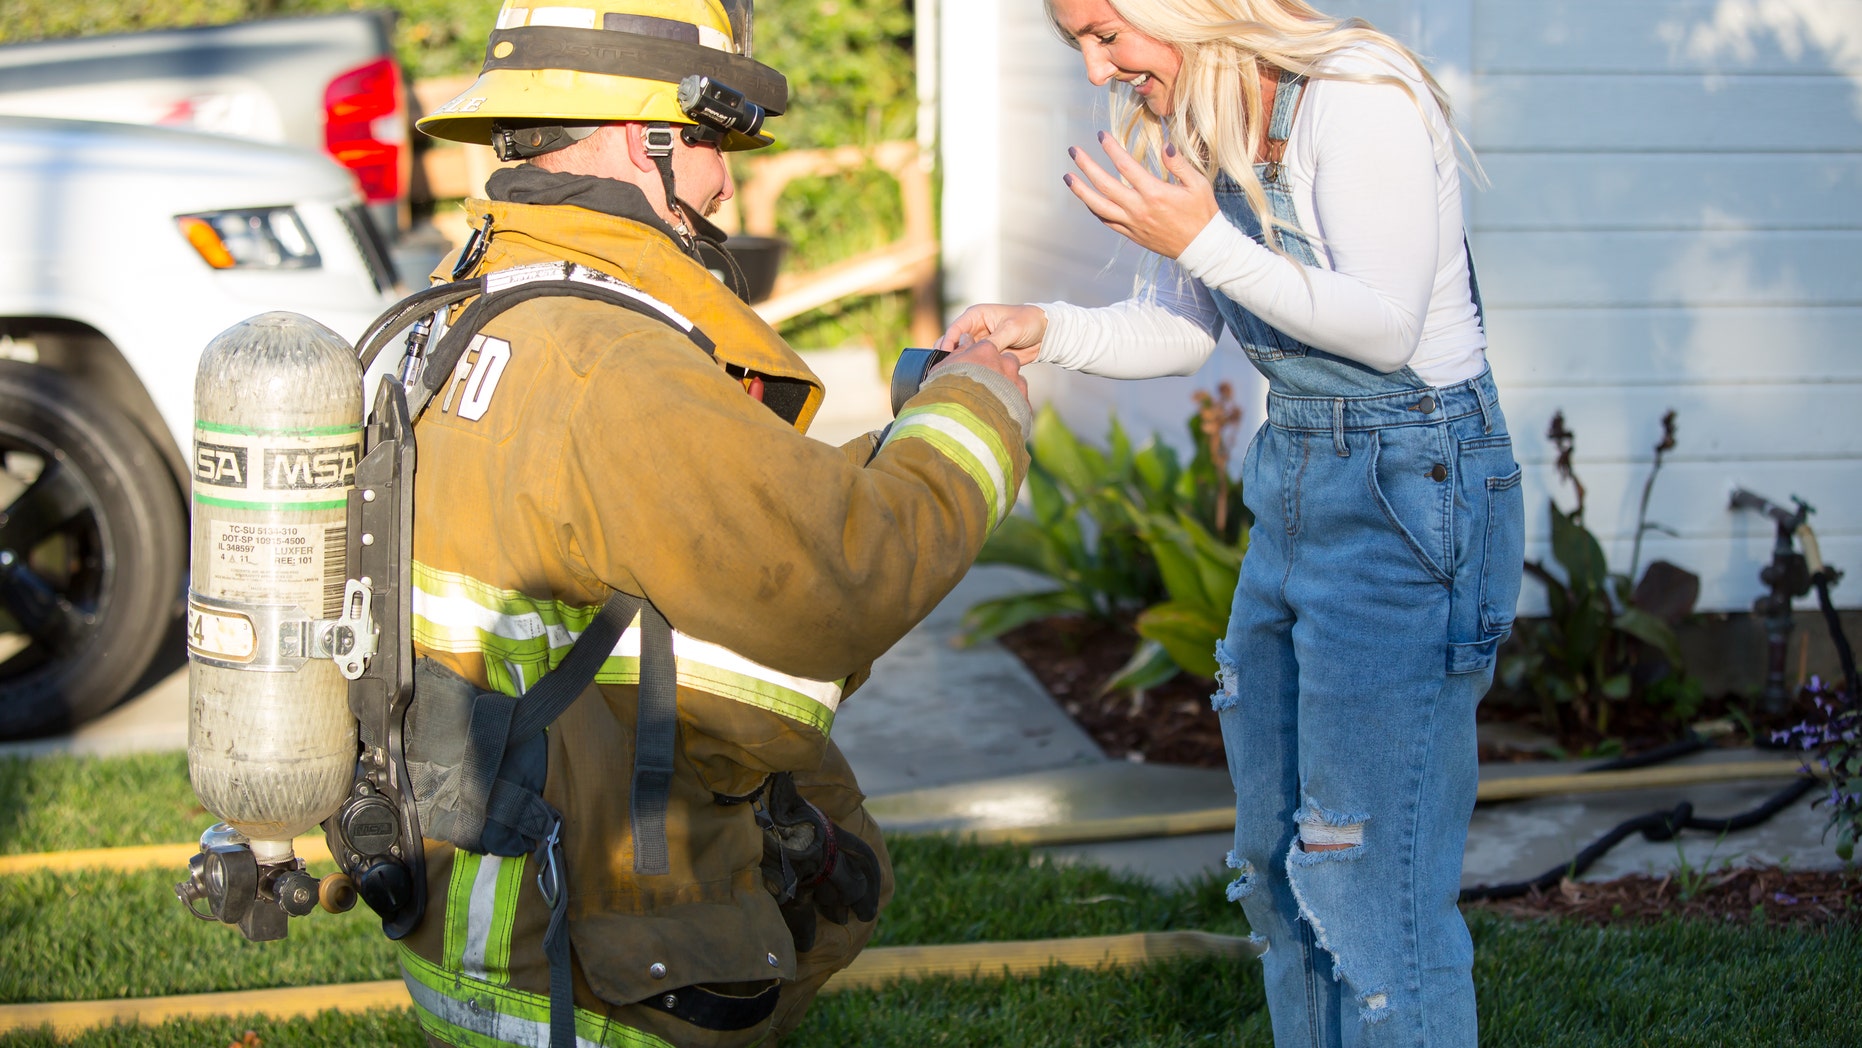 Firefighter stages dramatic blaze in his own home during family party to propose to girlfriend